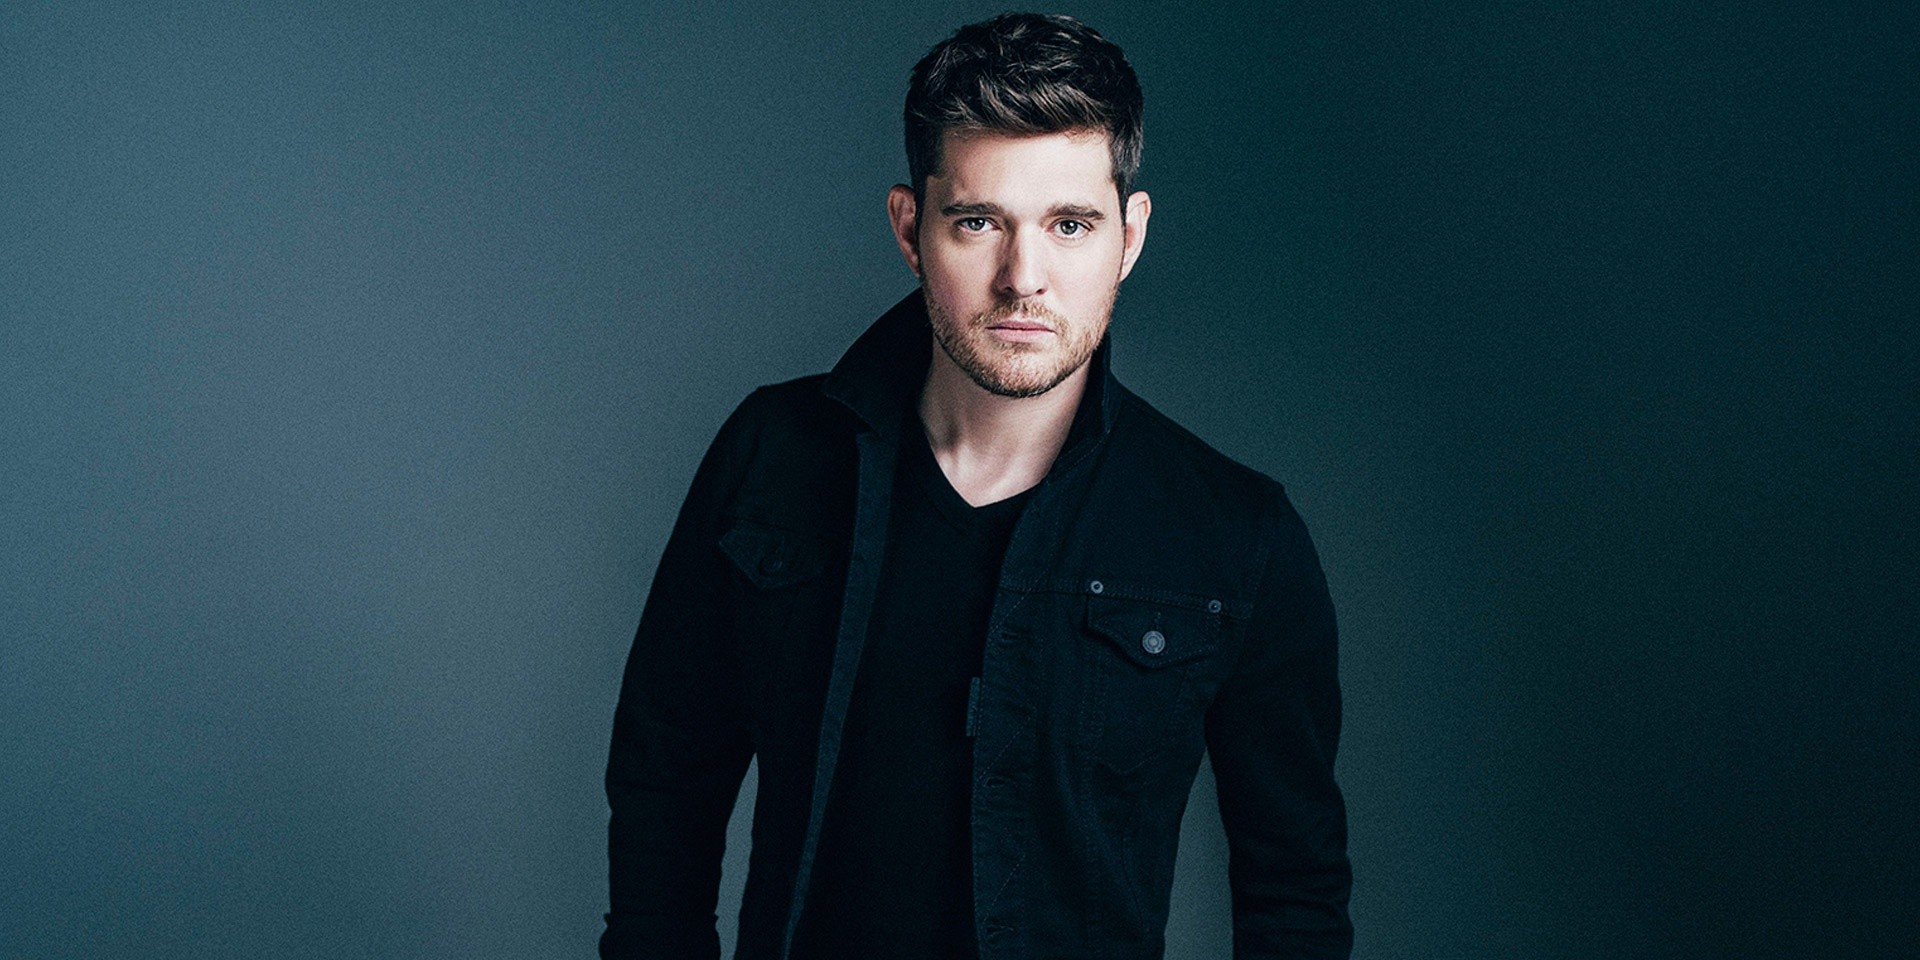 Michael Bublé to hold Manila concert